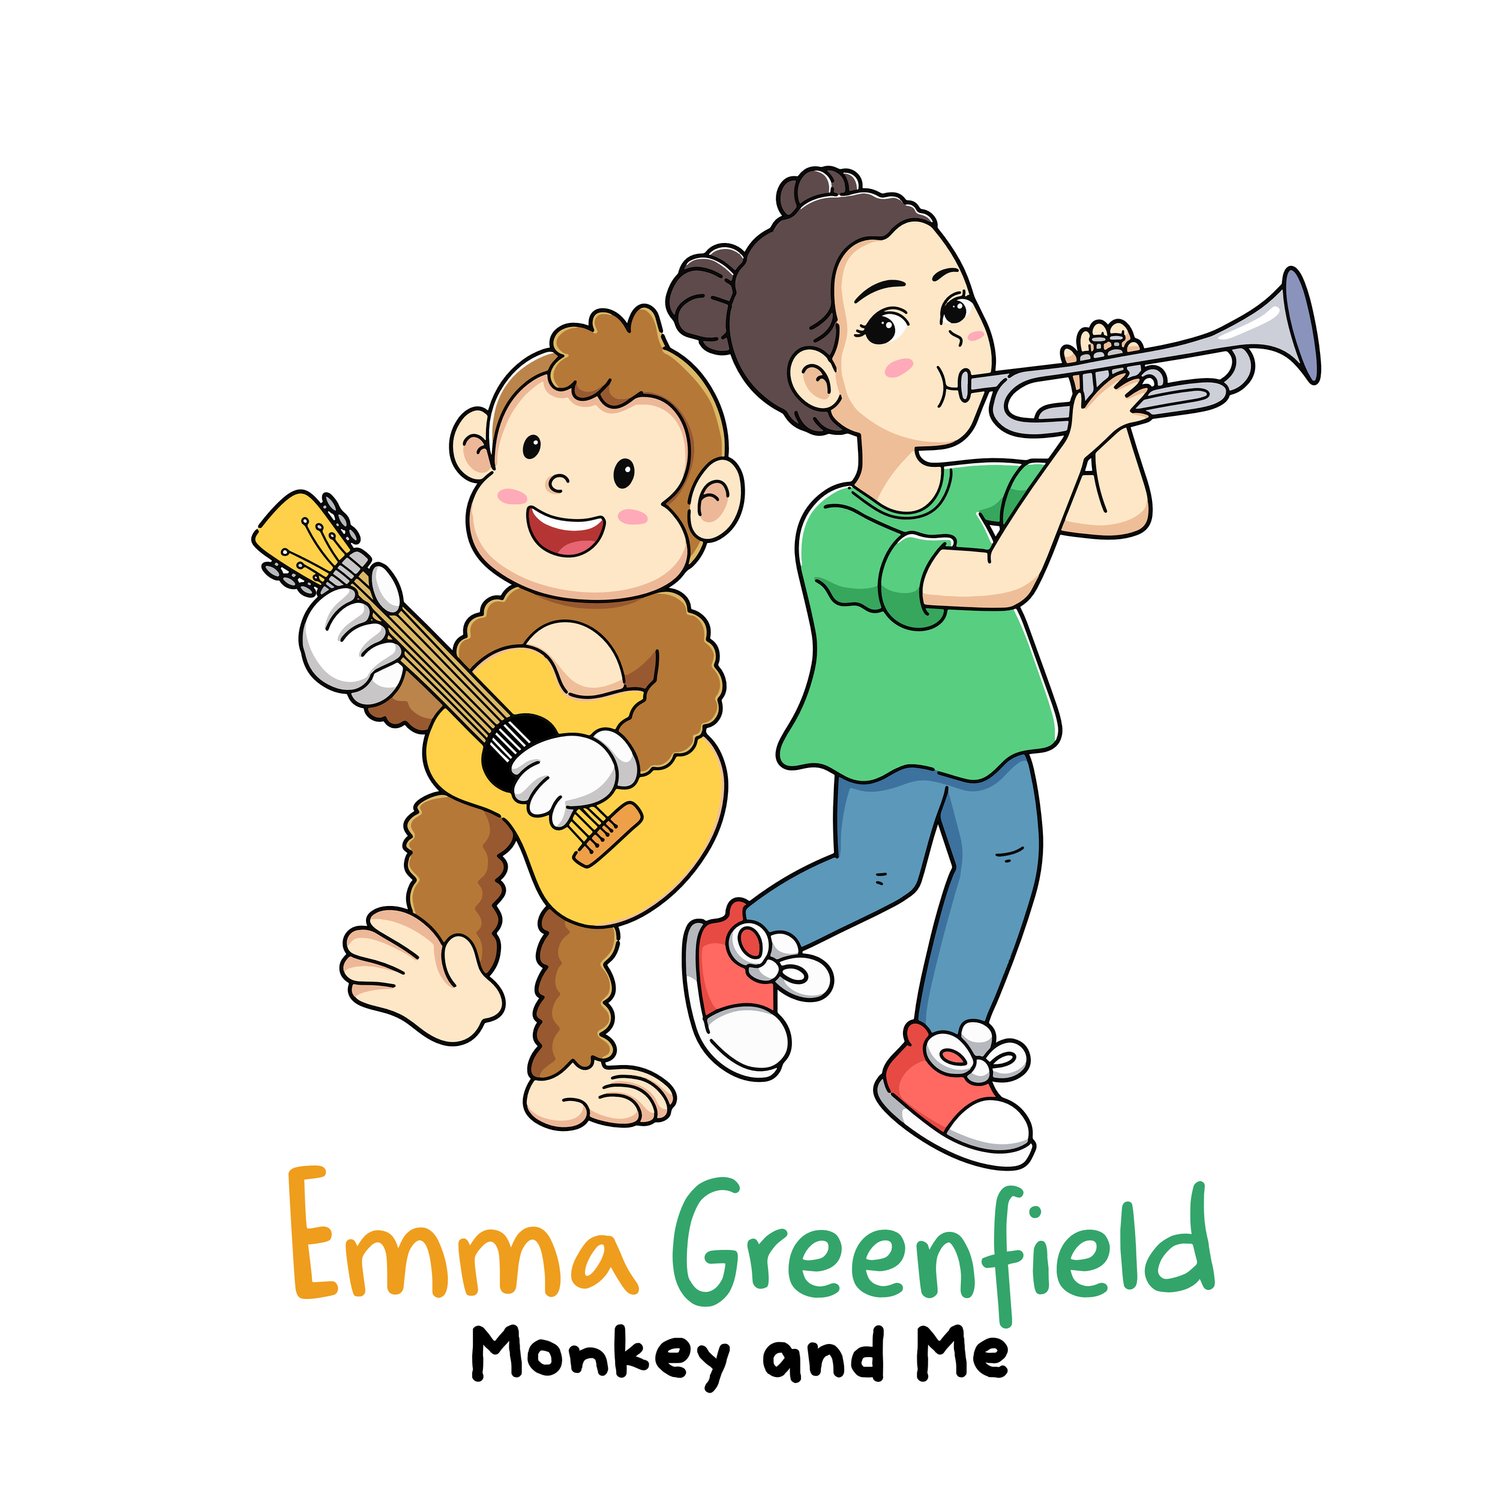 Emma Greenfield - Monkey and Me